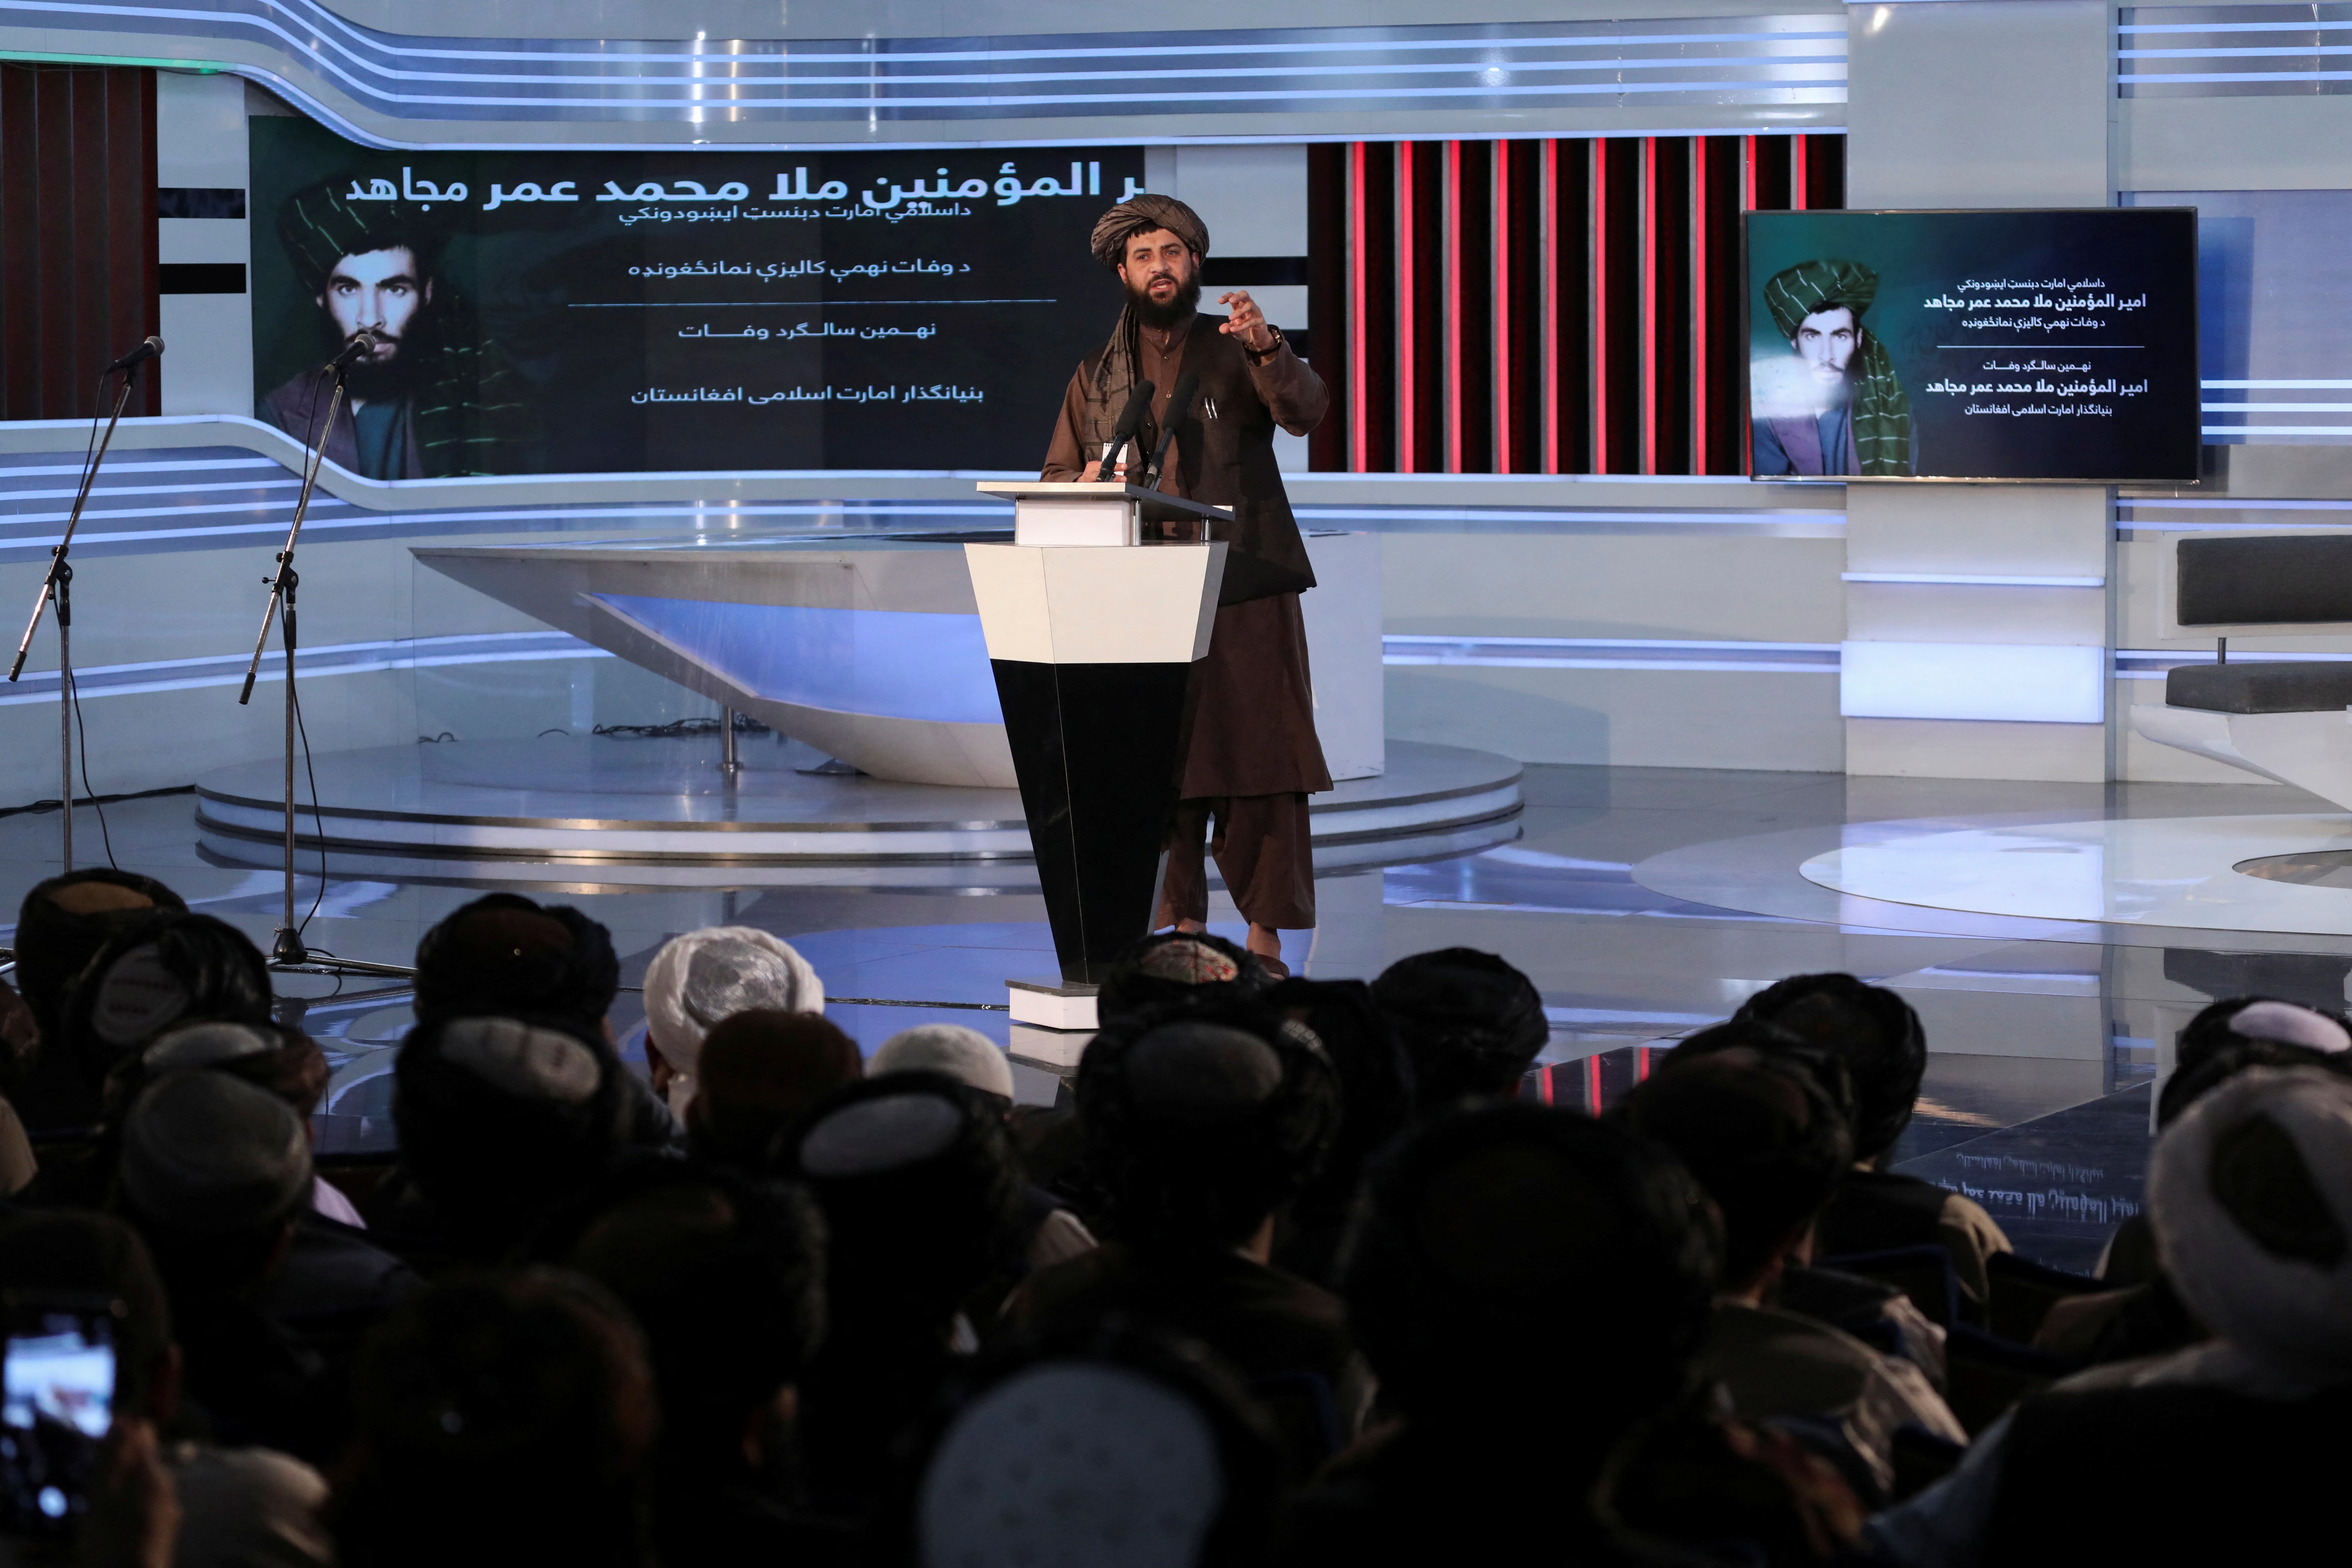 Taliban spokesman Zabihullah Mujahid speaks during the death anniversary of Mullah Mohammad Omar, The late leader and founder of the Taliban in Kabul